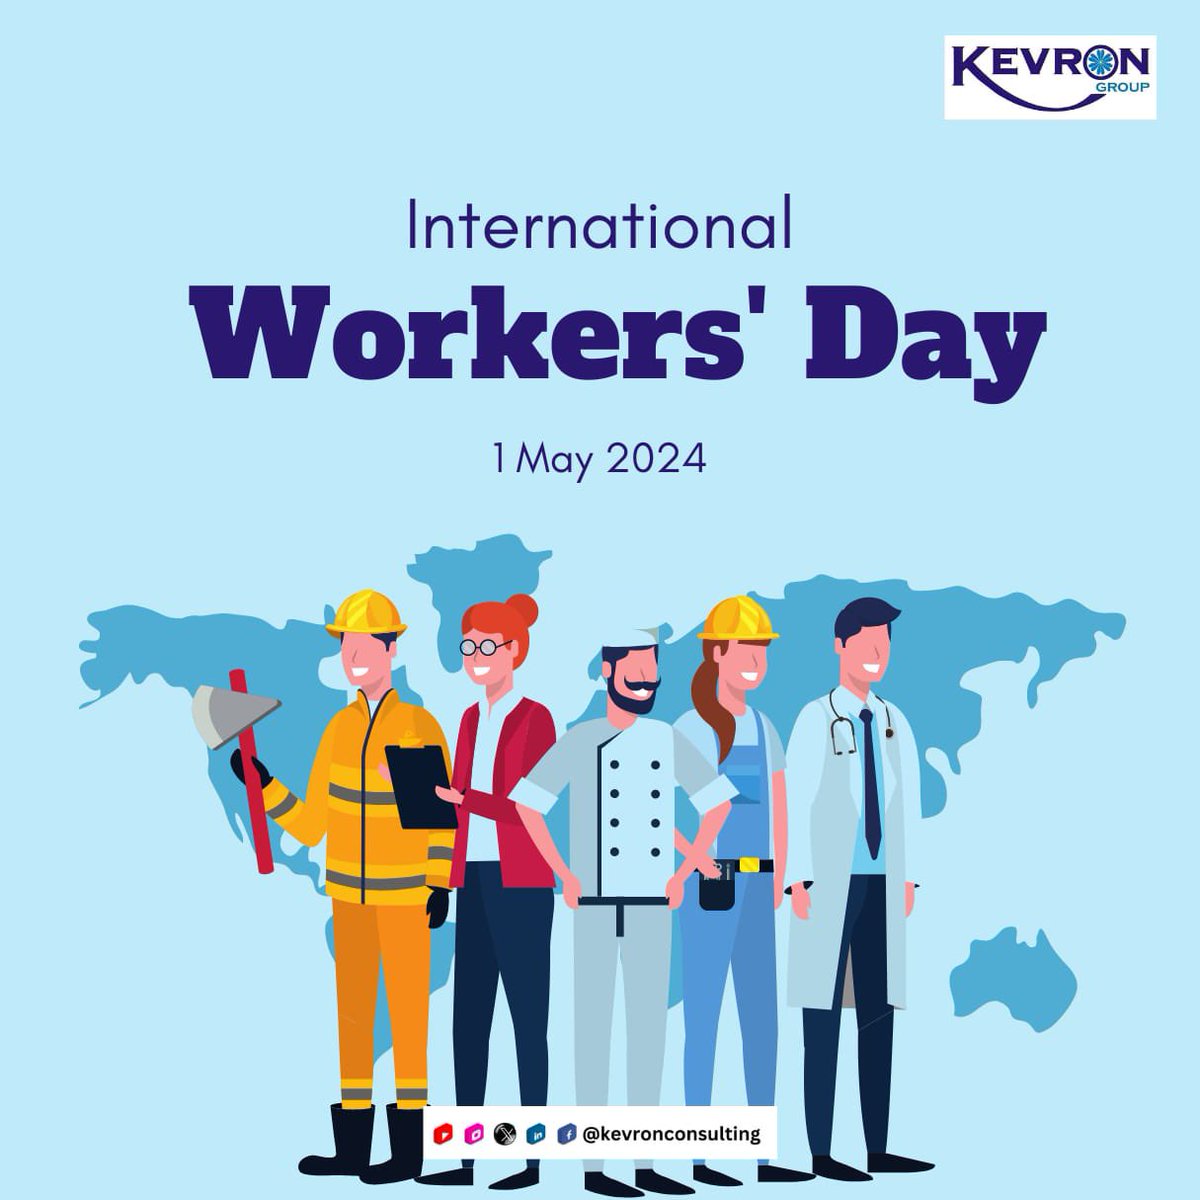 Happy Workers' Day from @GroupKevron 🎉 Let's celebrate the amazing contributions of workers everywhere, making the world a better place one day at a time! #KevronCelebrates #WorkersDay #LaborDay #Appreciation #ThankYouWorkers #WorkforceHeroes @FowodeShola